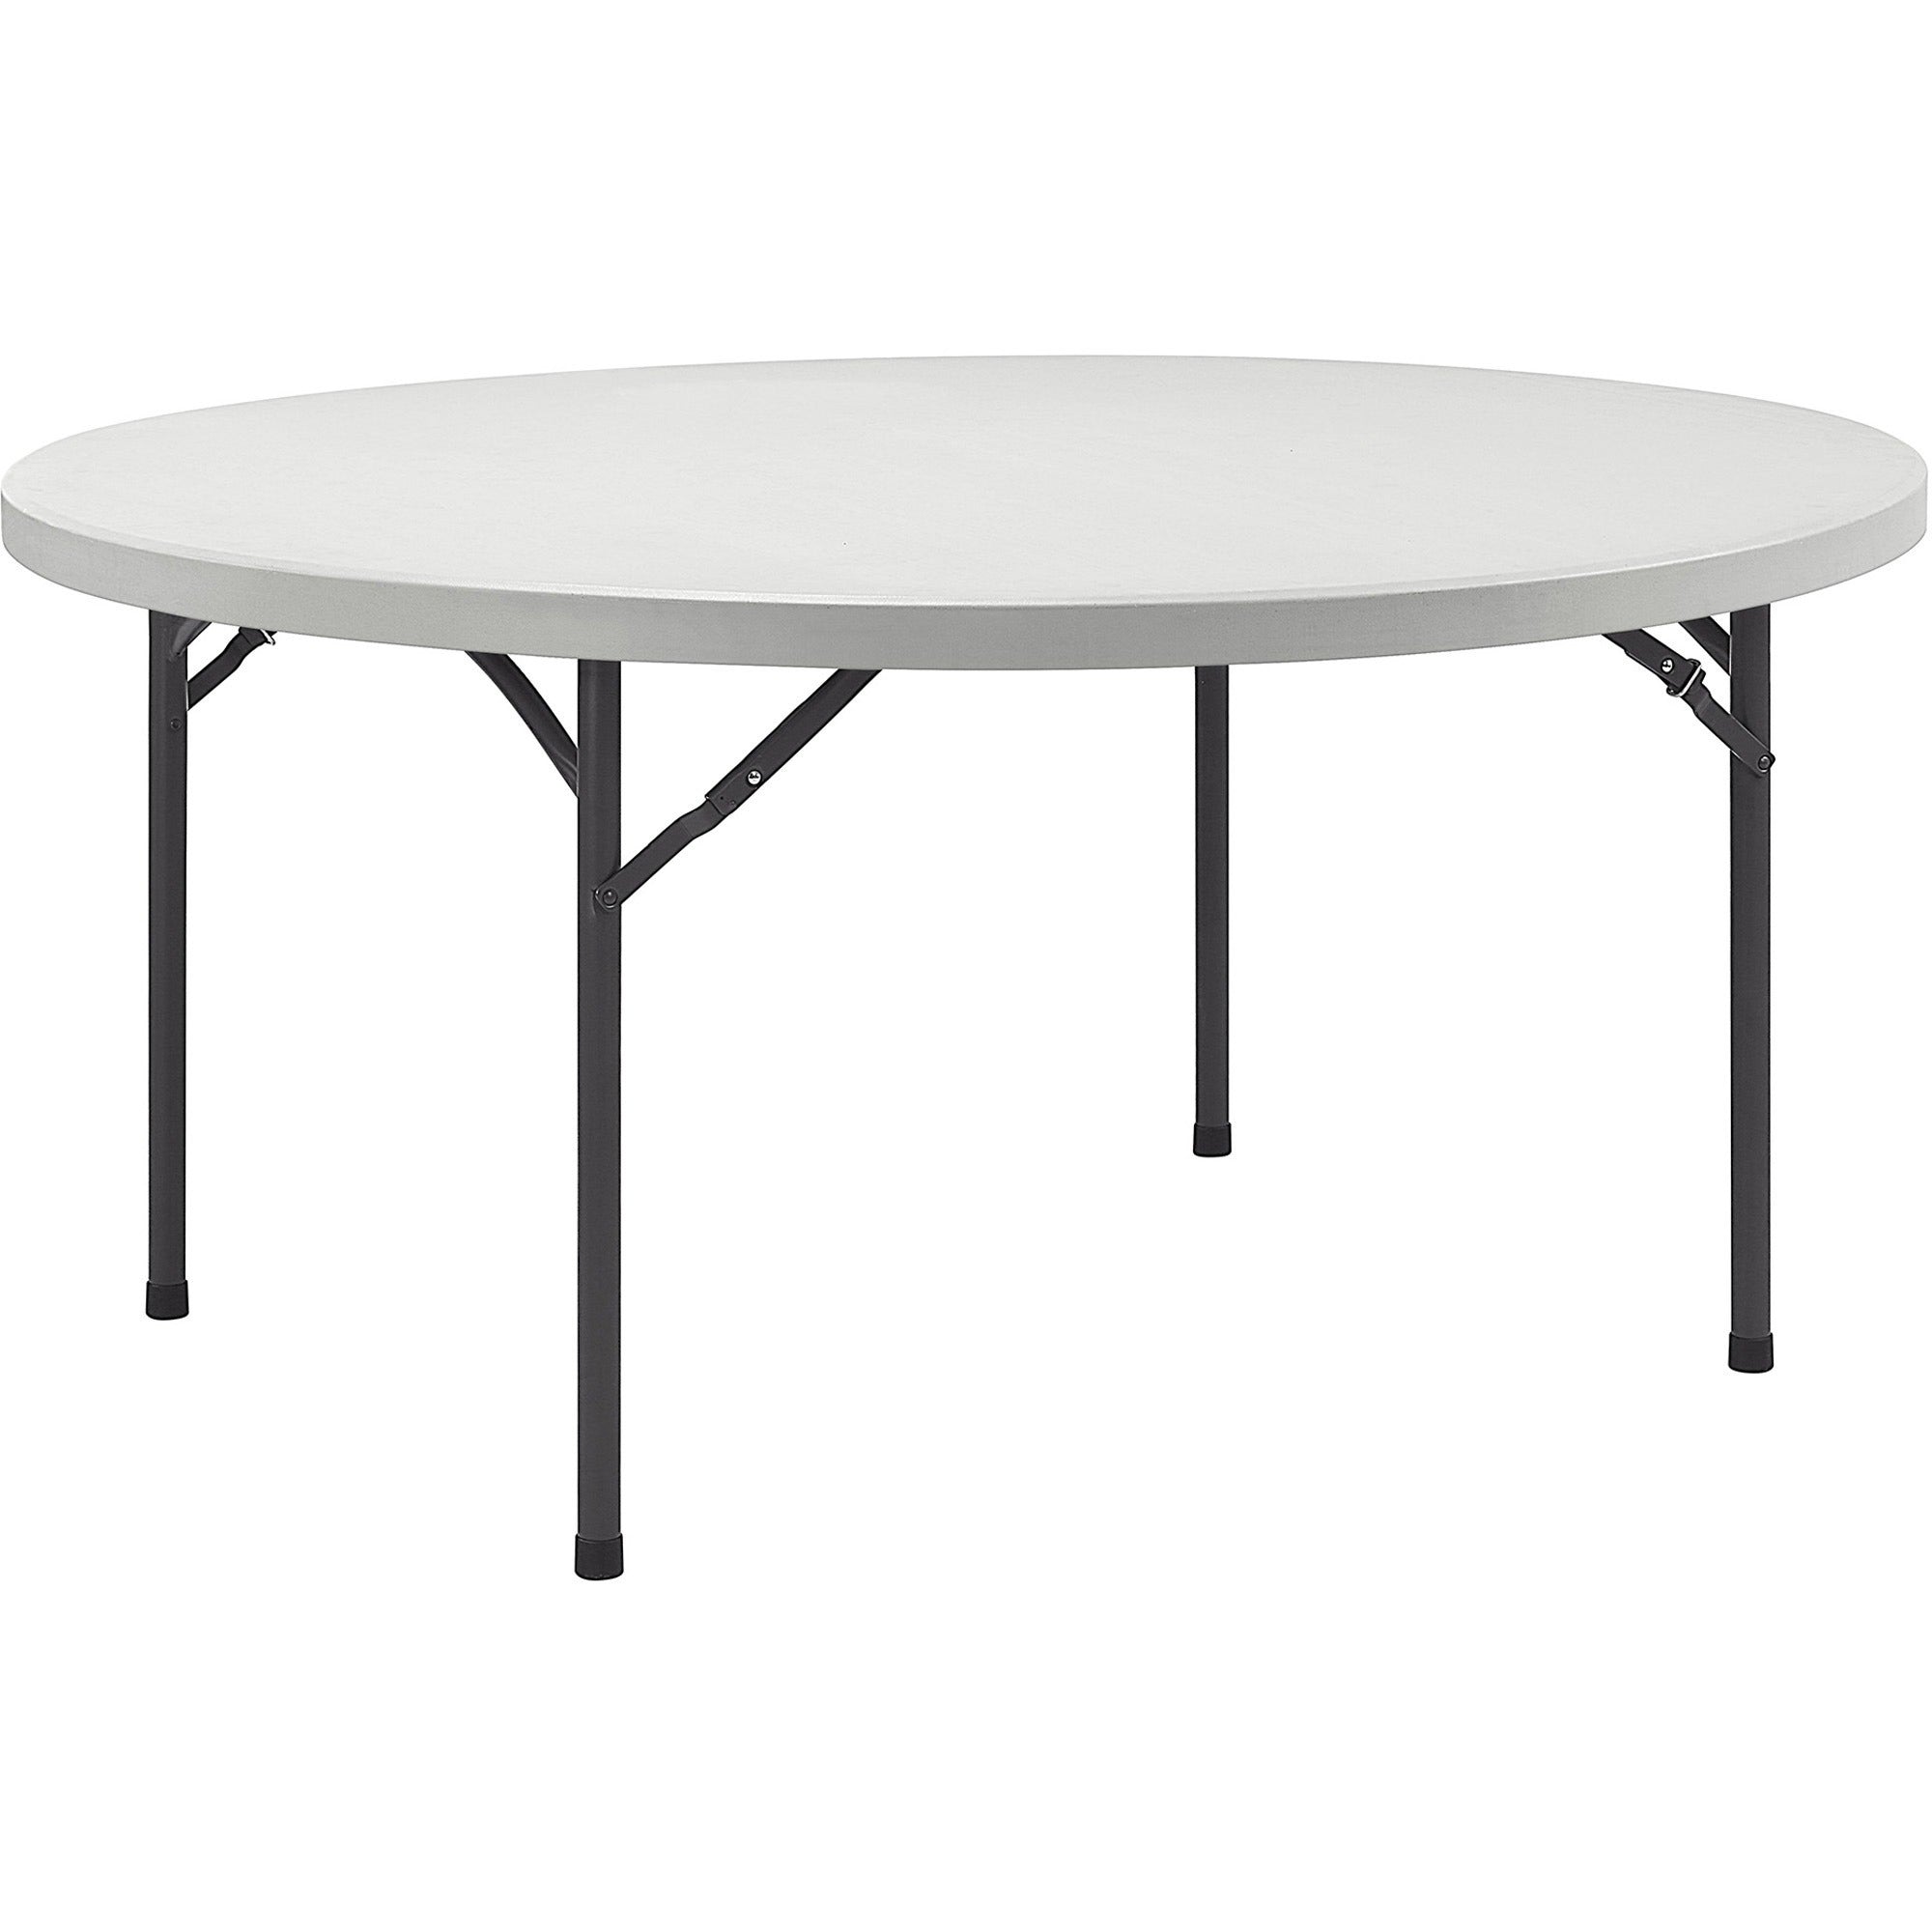 Lorell Ultra-Lite Banquet Folding Table - For - Table TopRound Top - 800 lb Capacity x 71" Table Top Diameter - 29.25" Height x 71" Width x 71" Depth - Gray, Powder Coated - 1 Each - 